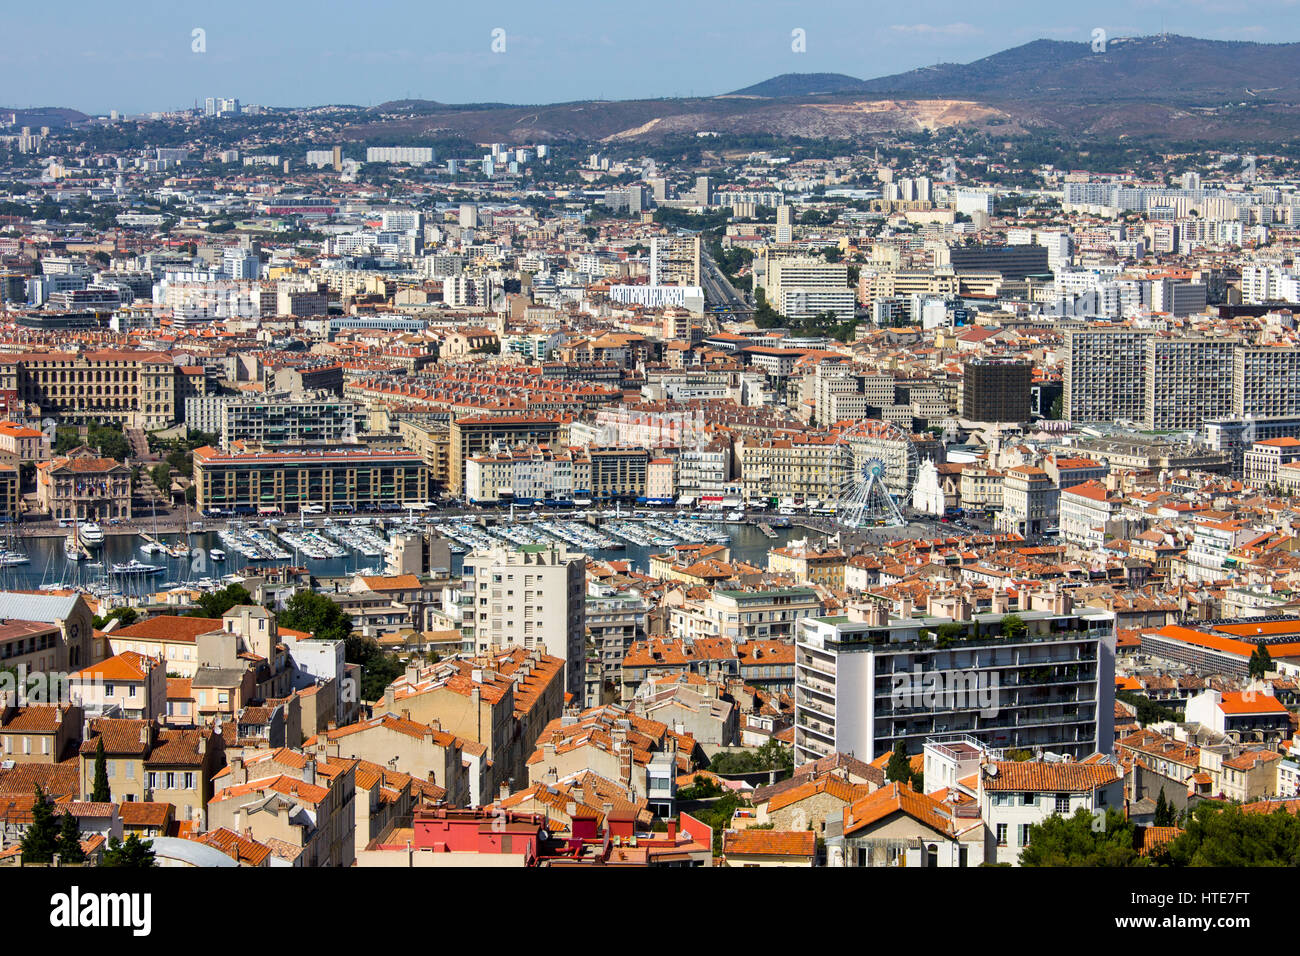 Views of Marseille, France's second largest city, from the church of Notre-Dame de la Garde on a beautiful summer day. Stock Photo